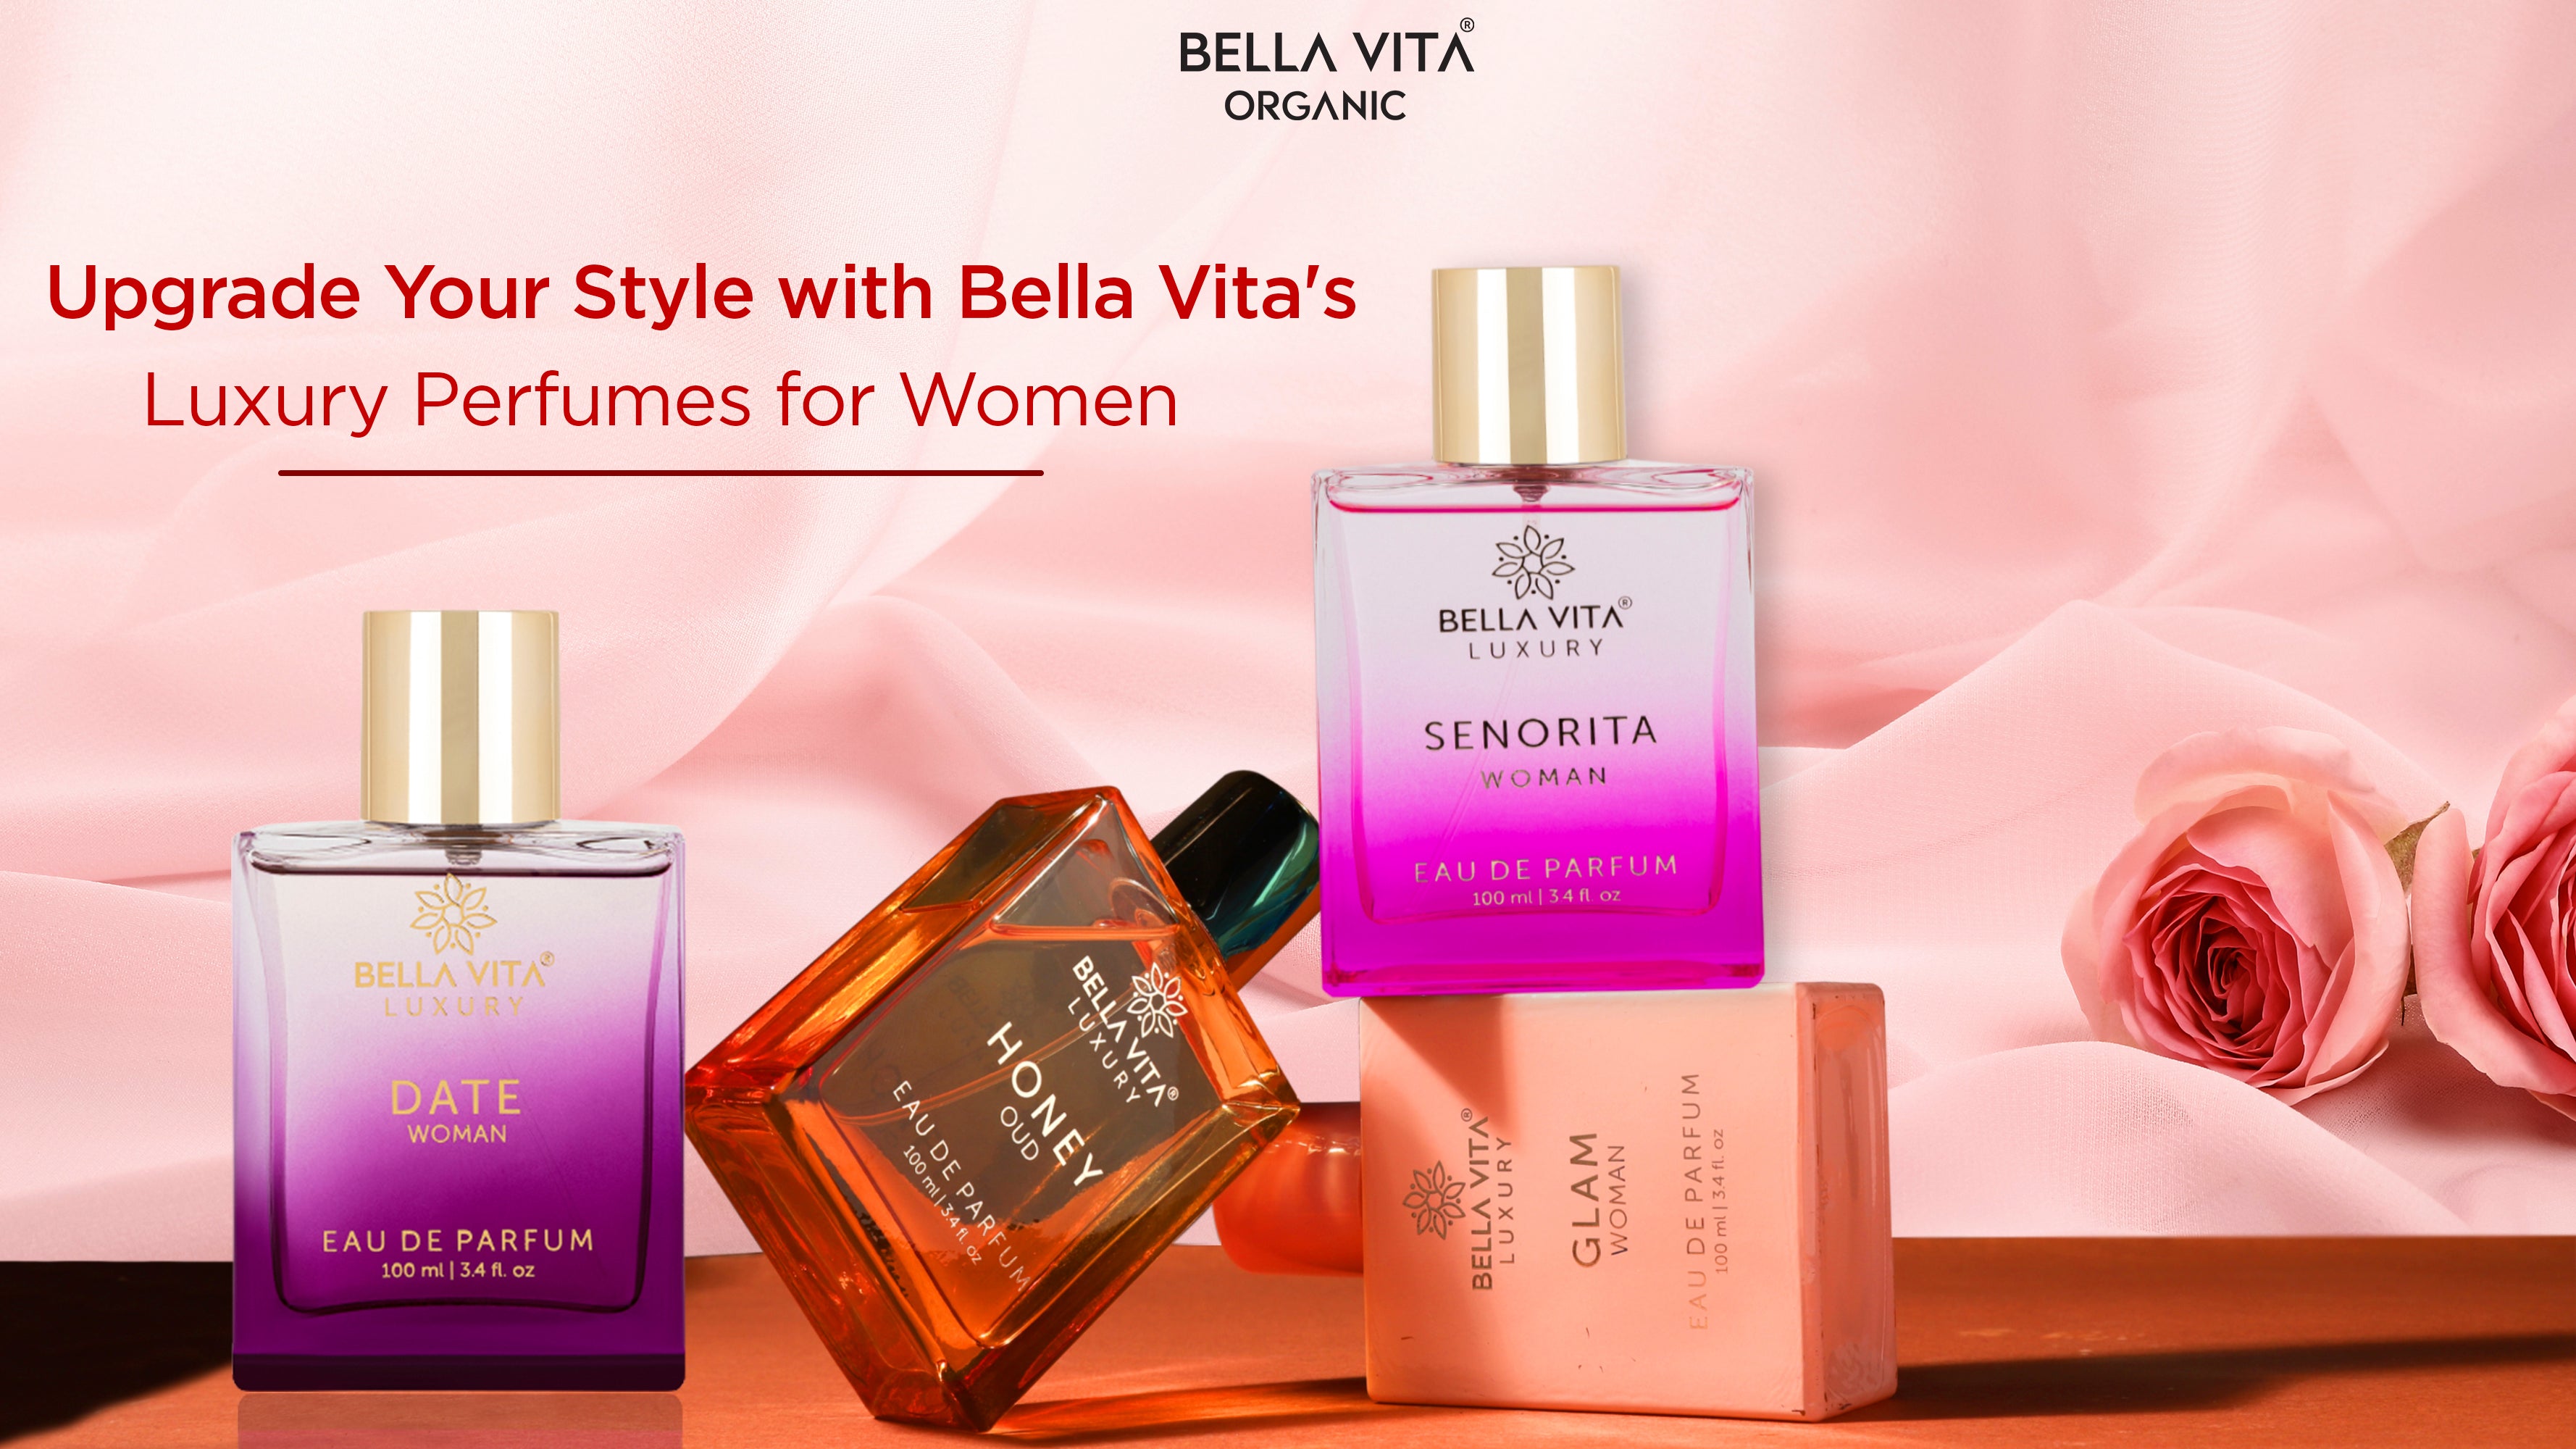 Upgrade Your Style with Luxury Perfumes for Women I Elevate Your